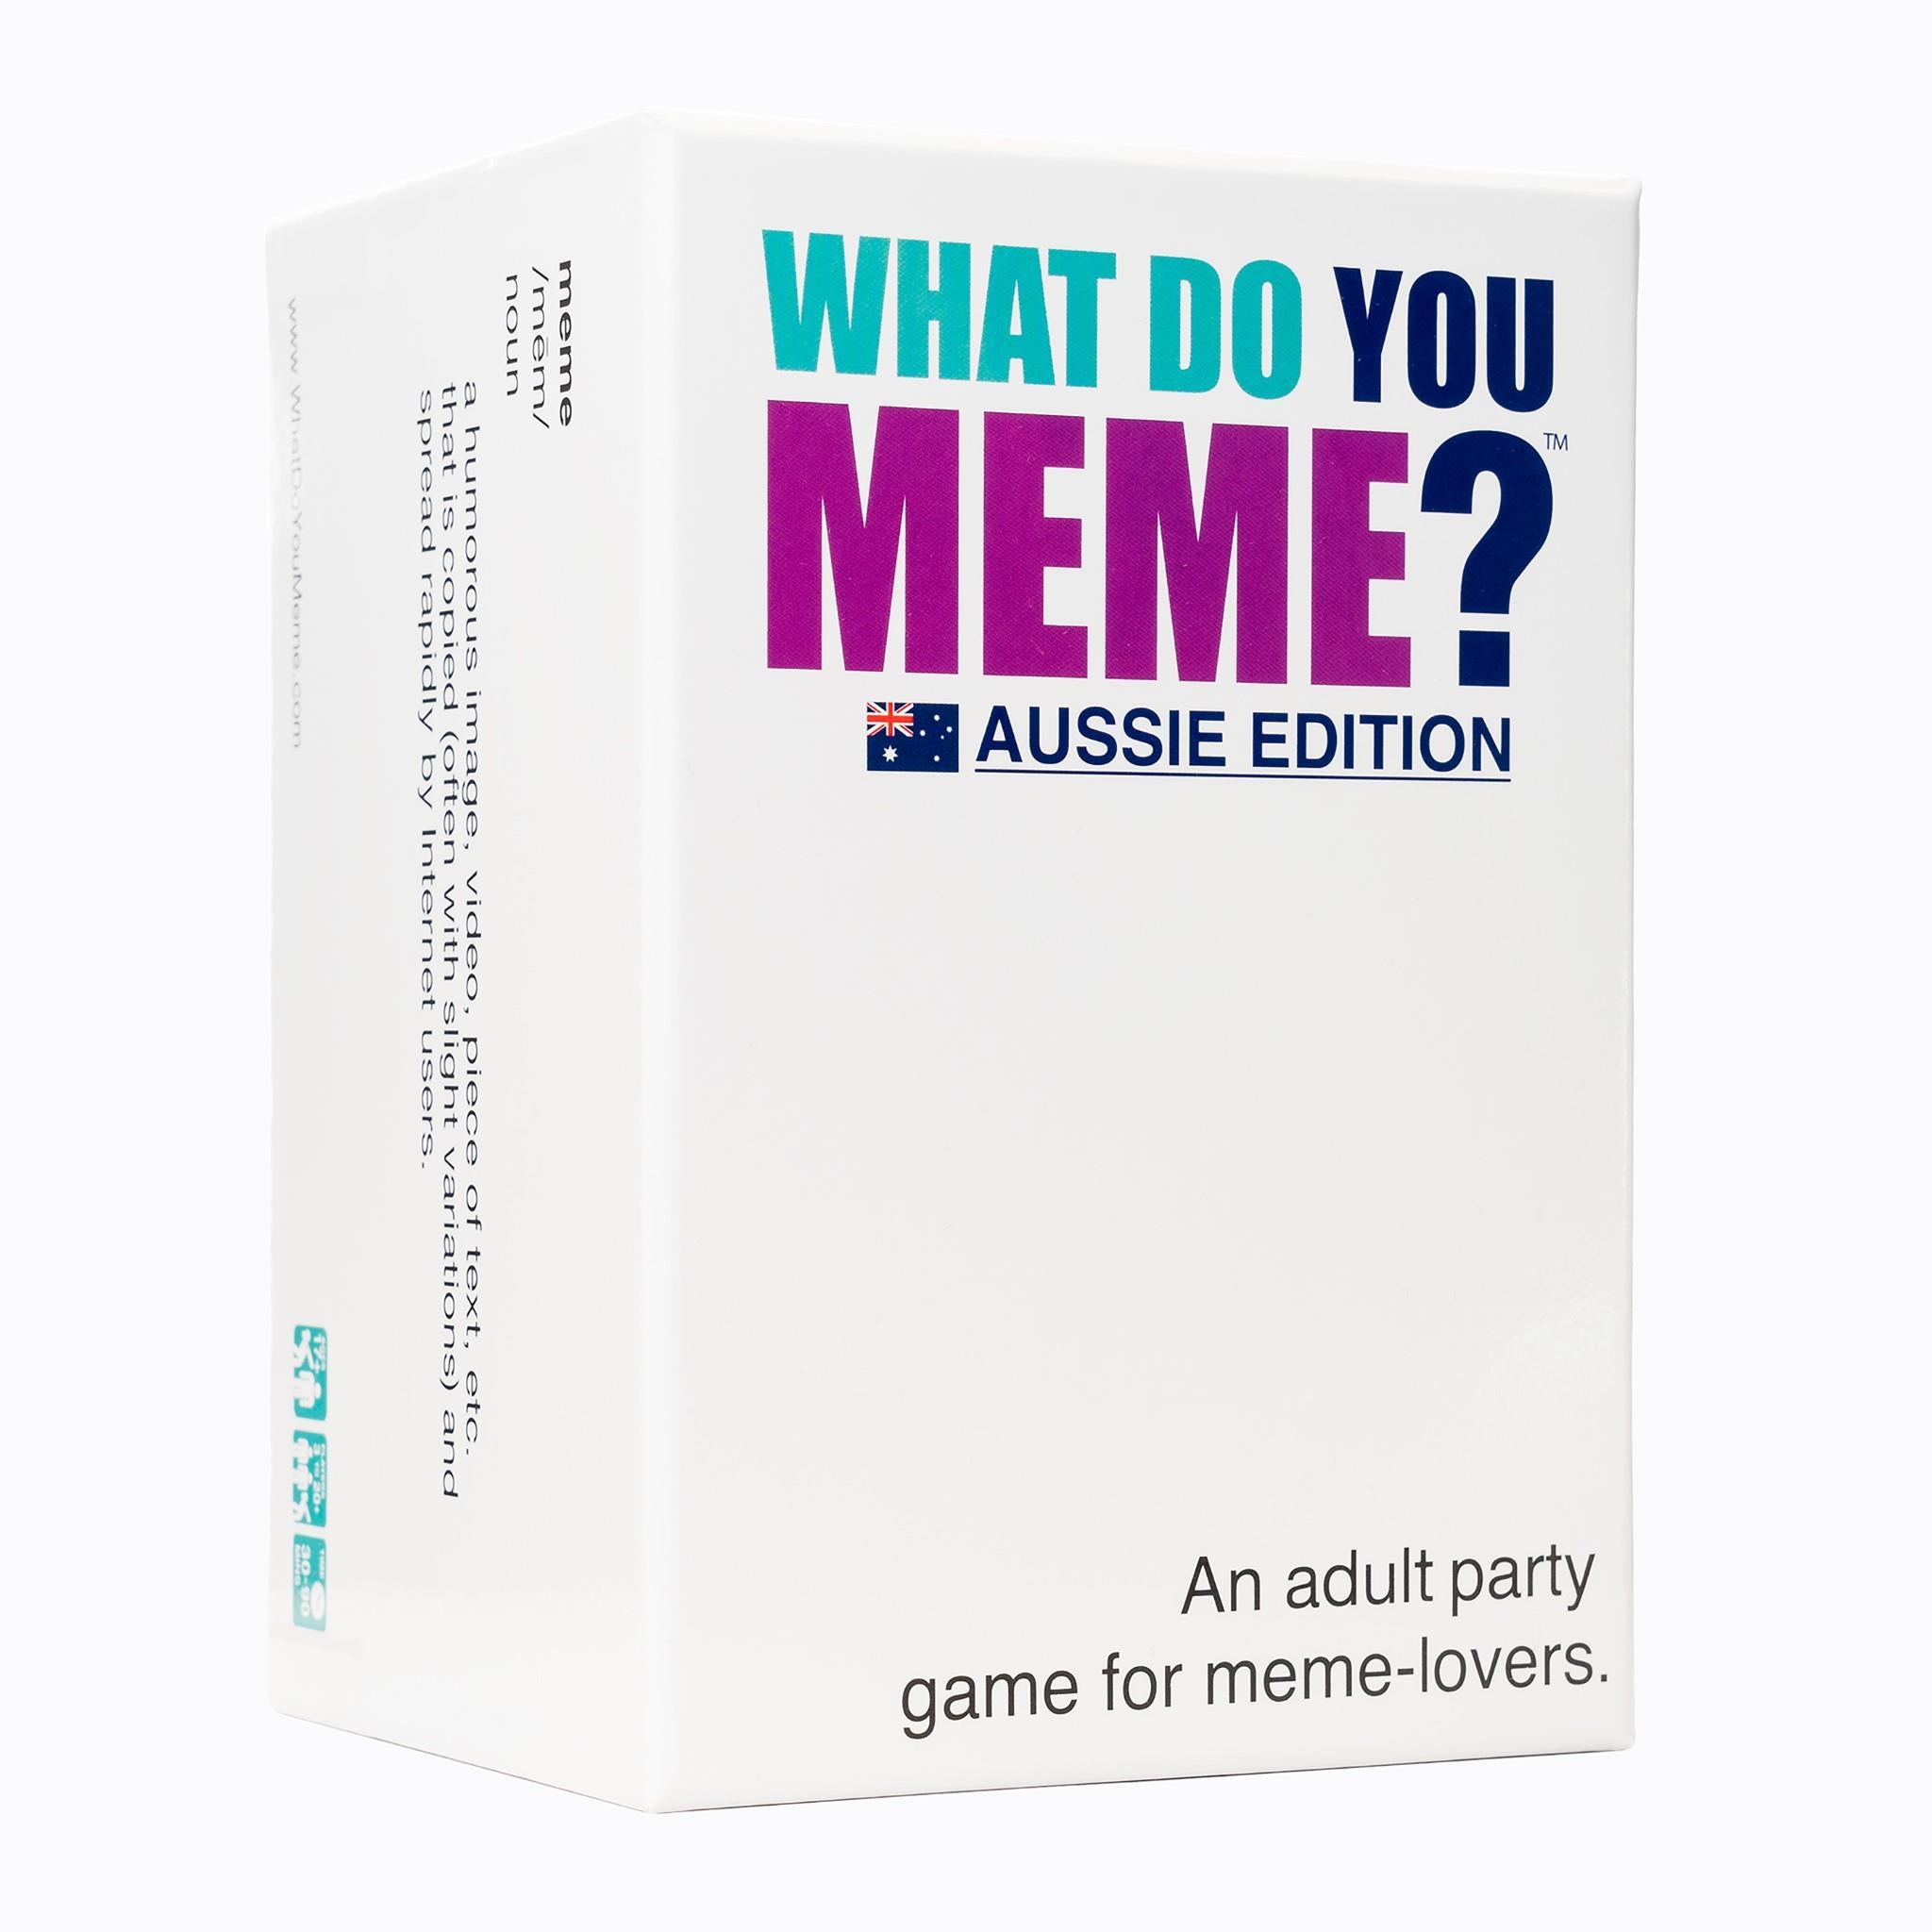  WHAT DO YOU MEME? Core Game - The Hilarious Adult